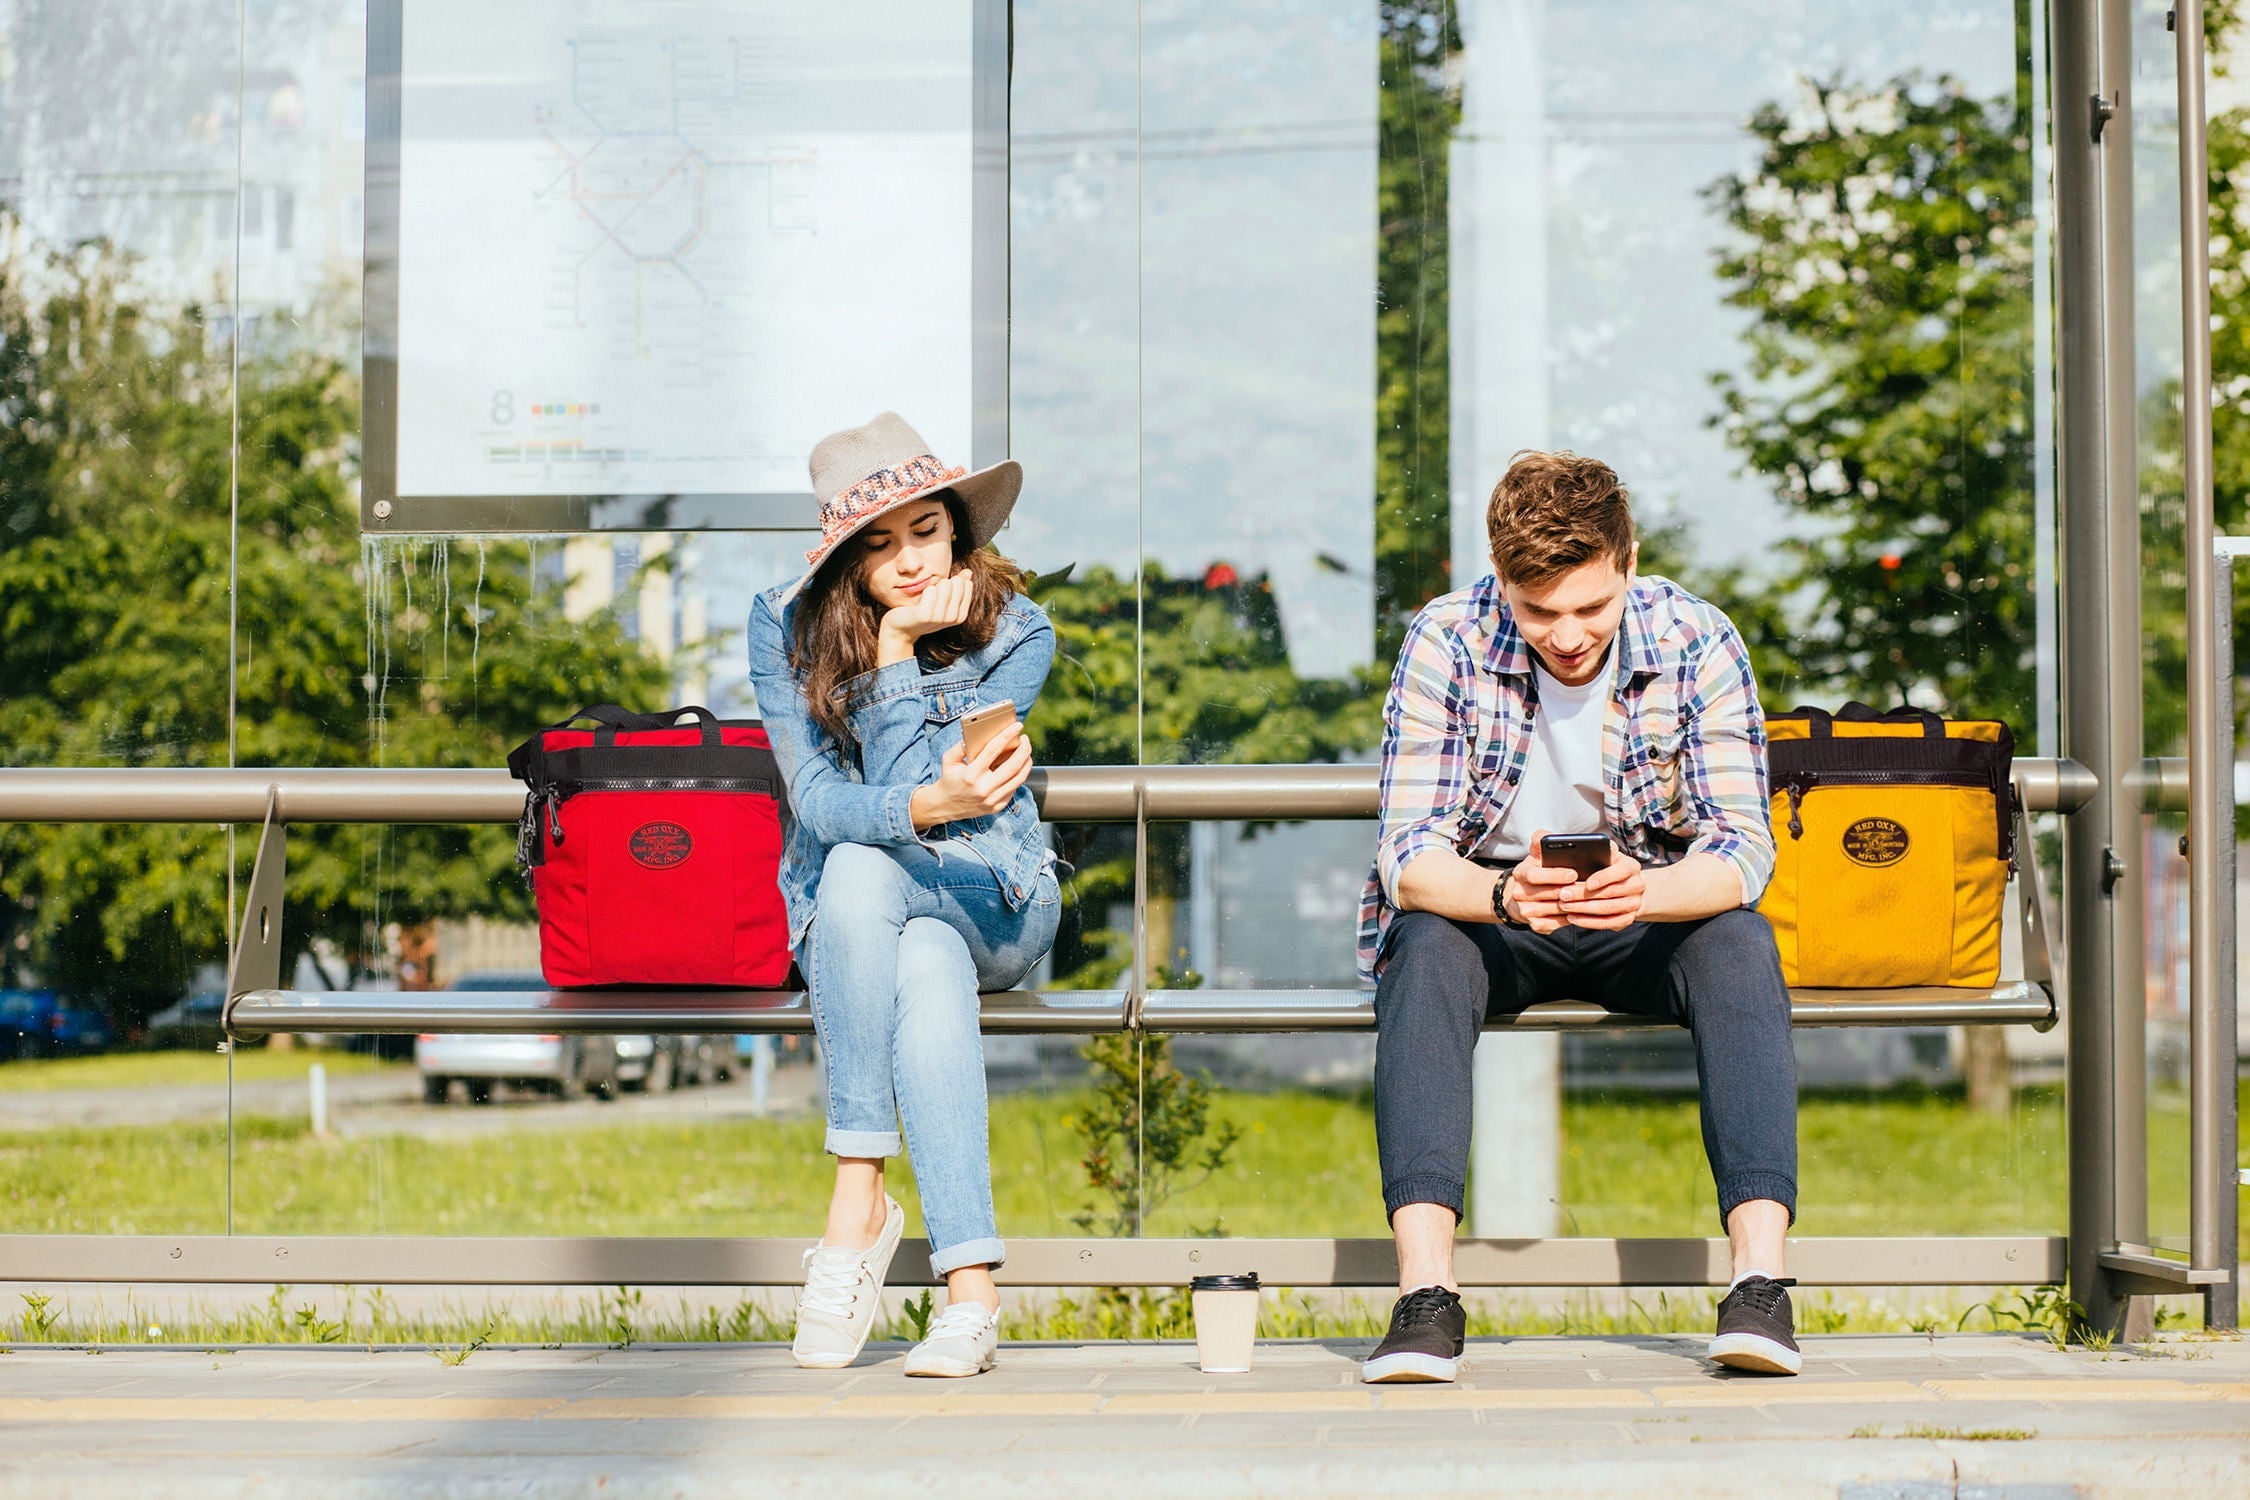 PUP young couple on phones at bus stop